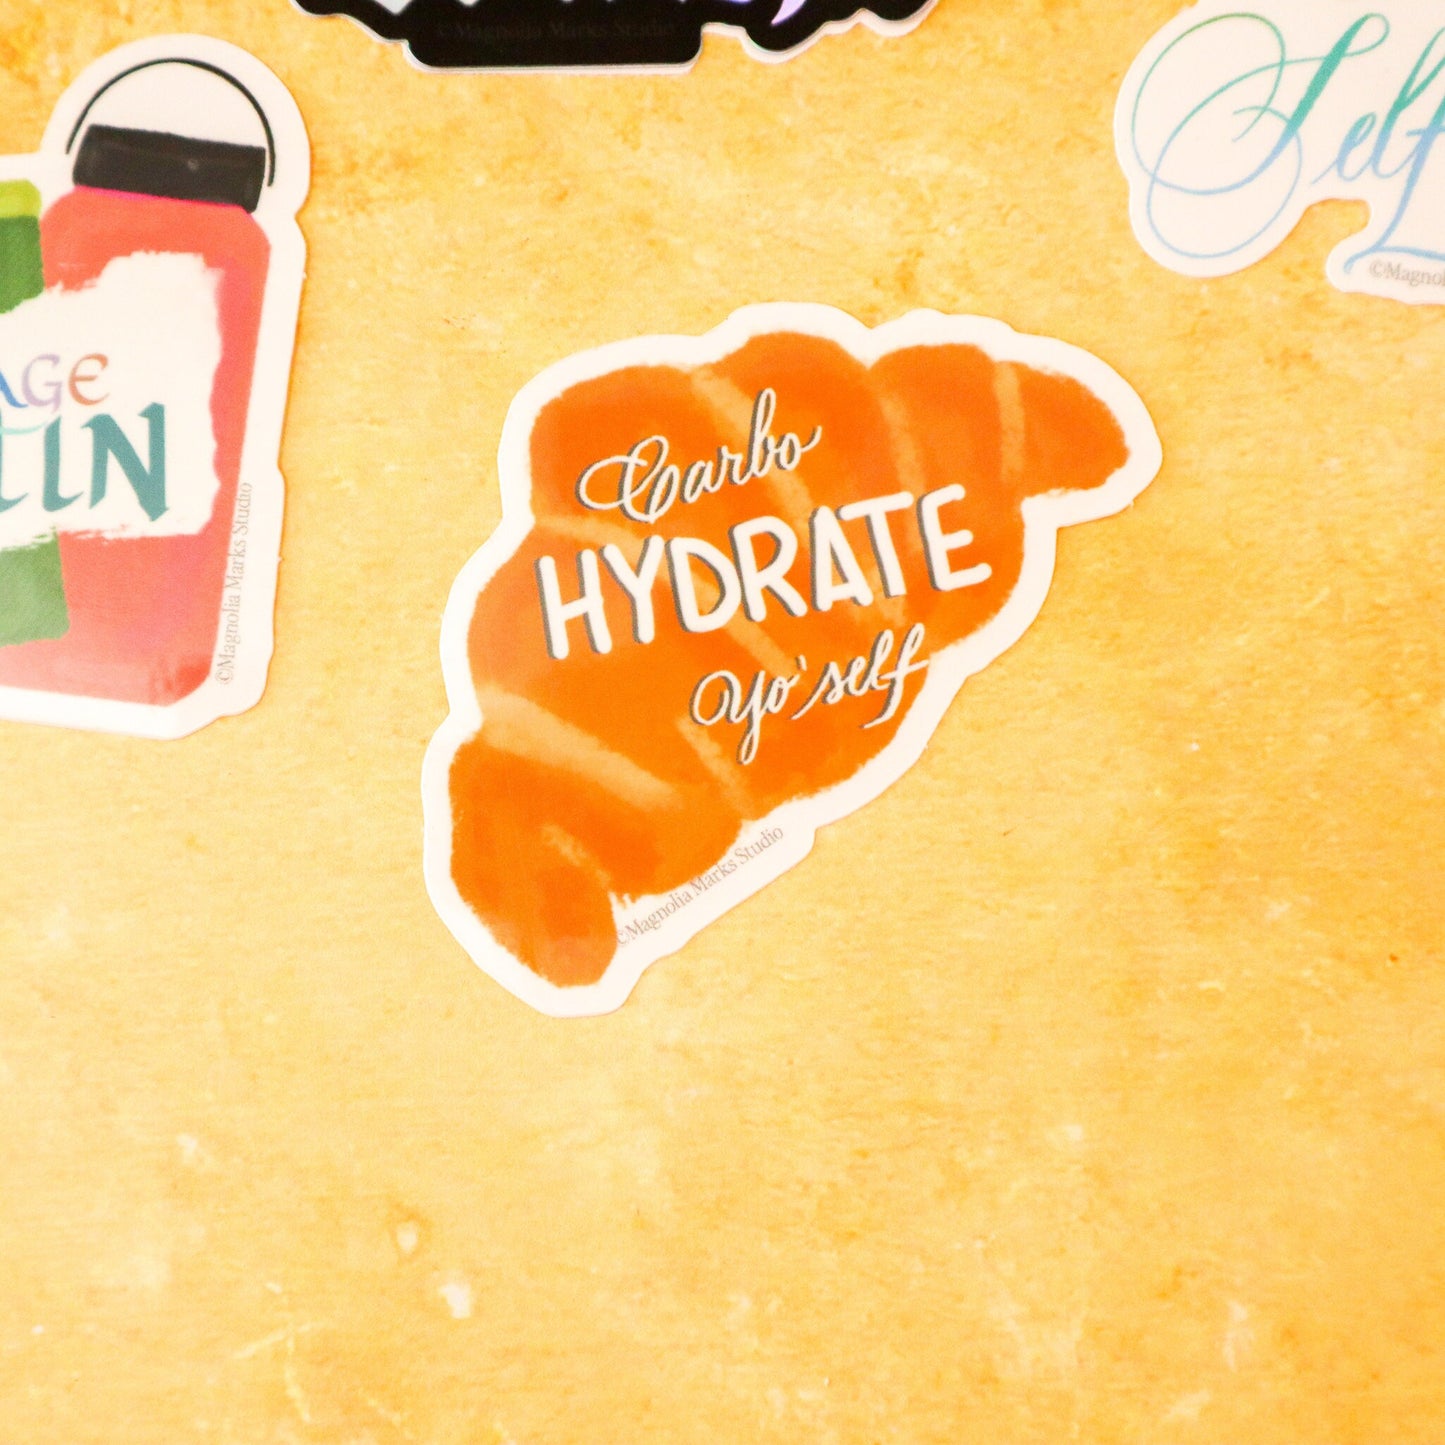 Funny carbo-HYDRATE sticker